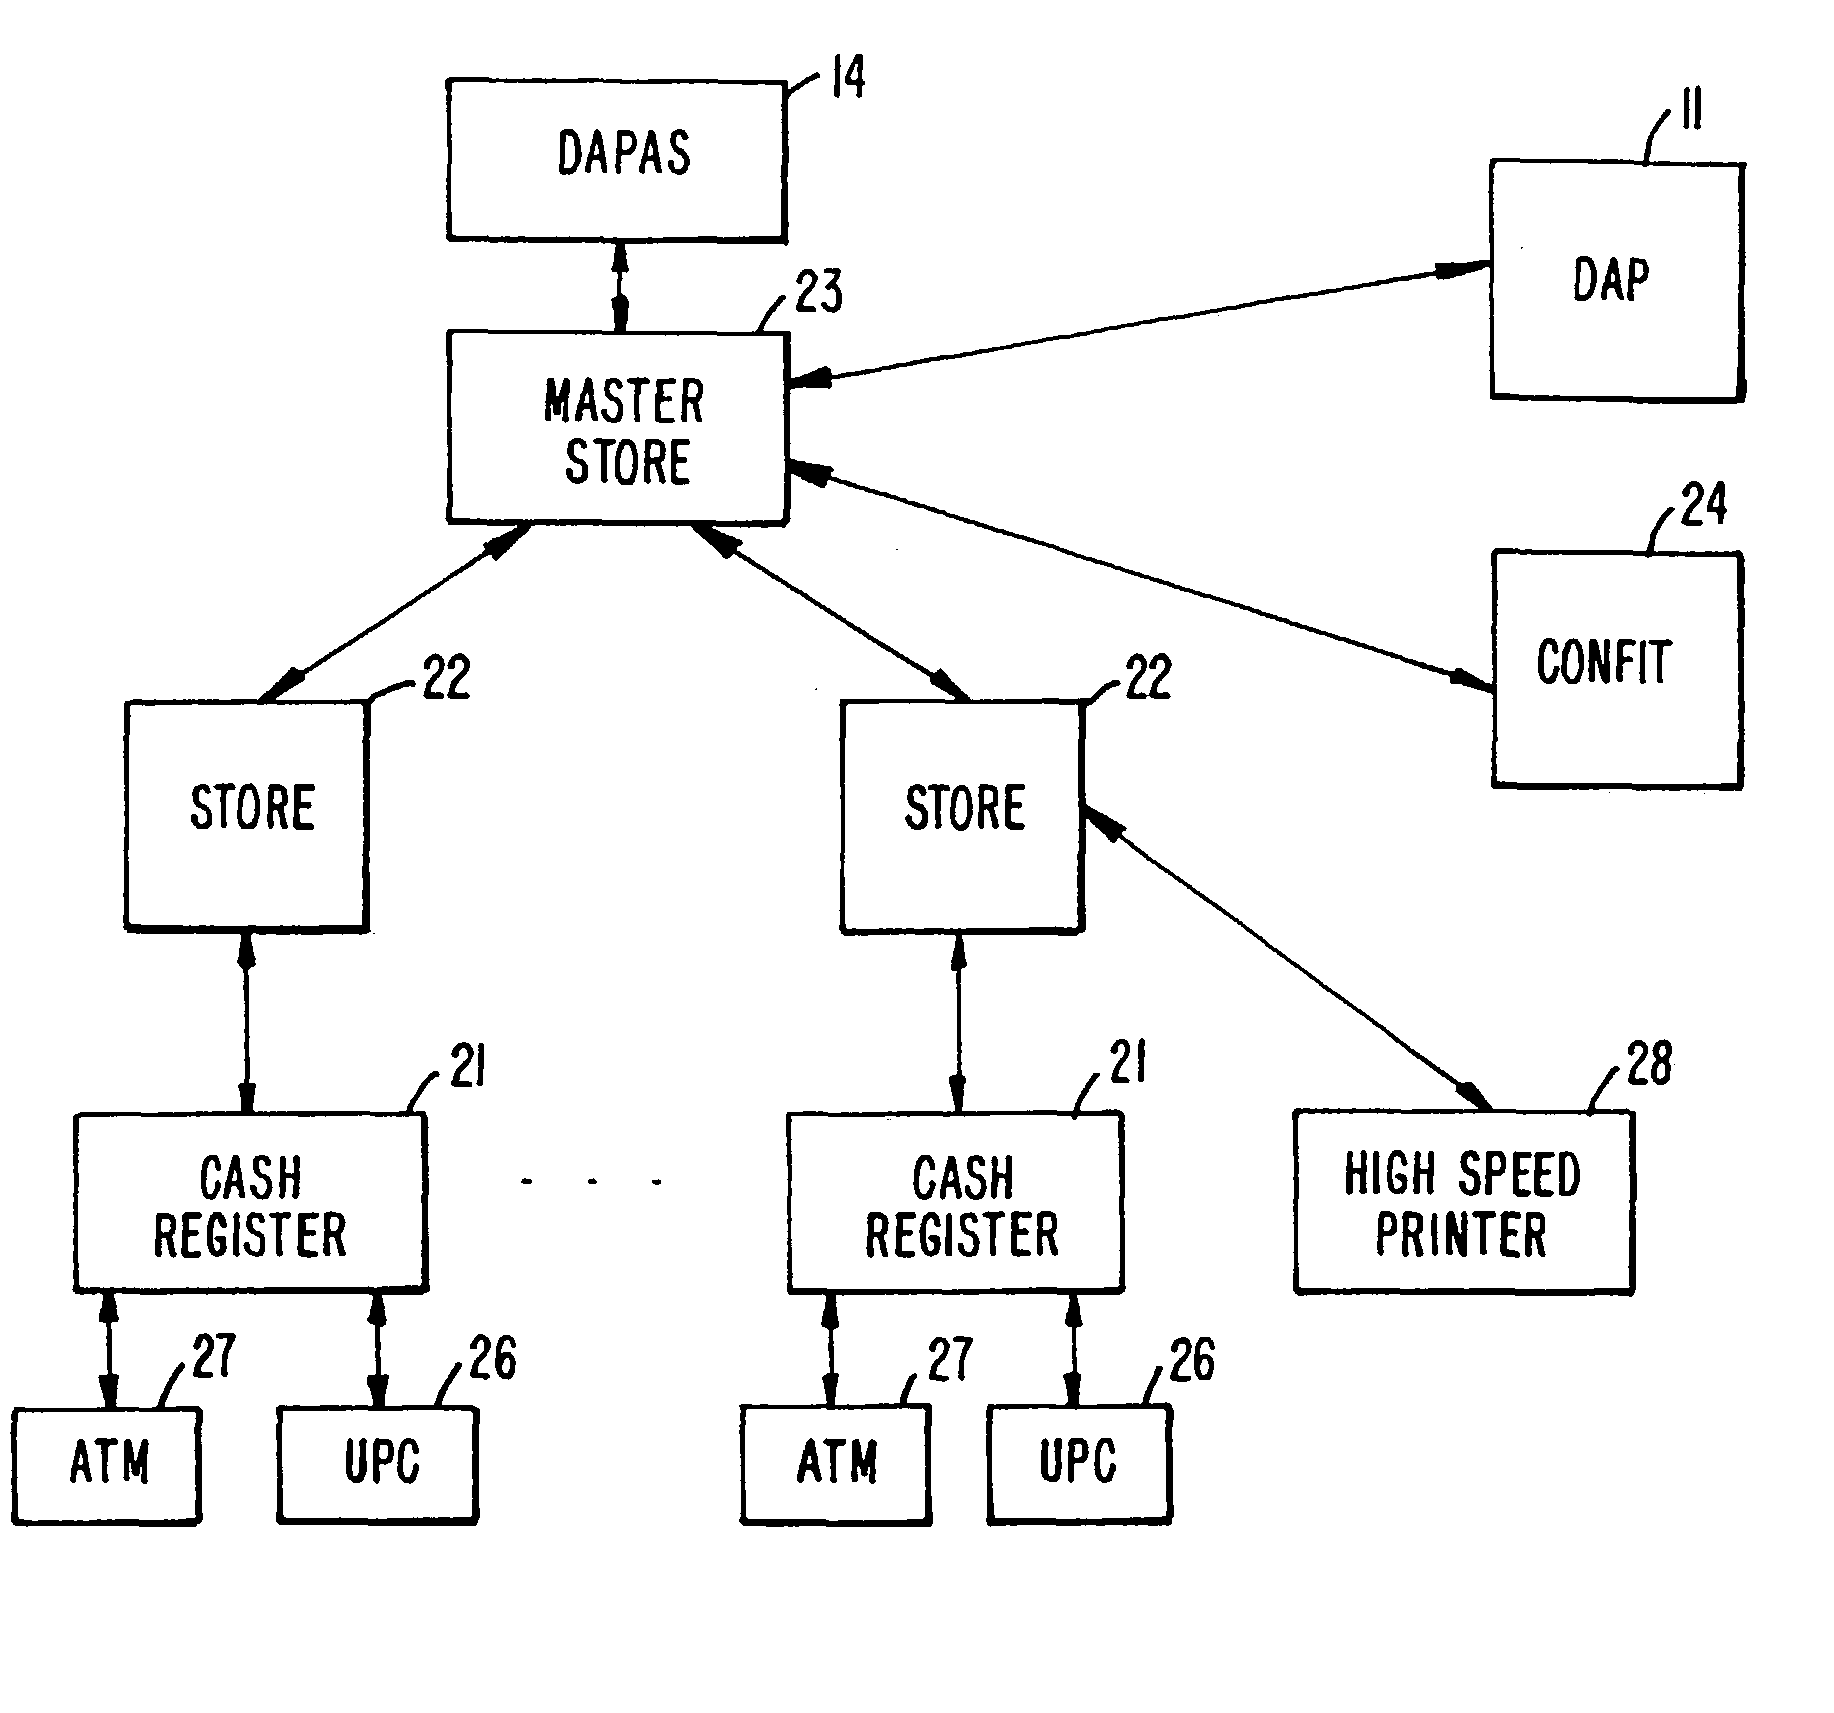 System and method for inverted promotions